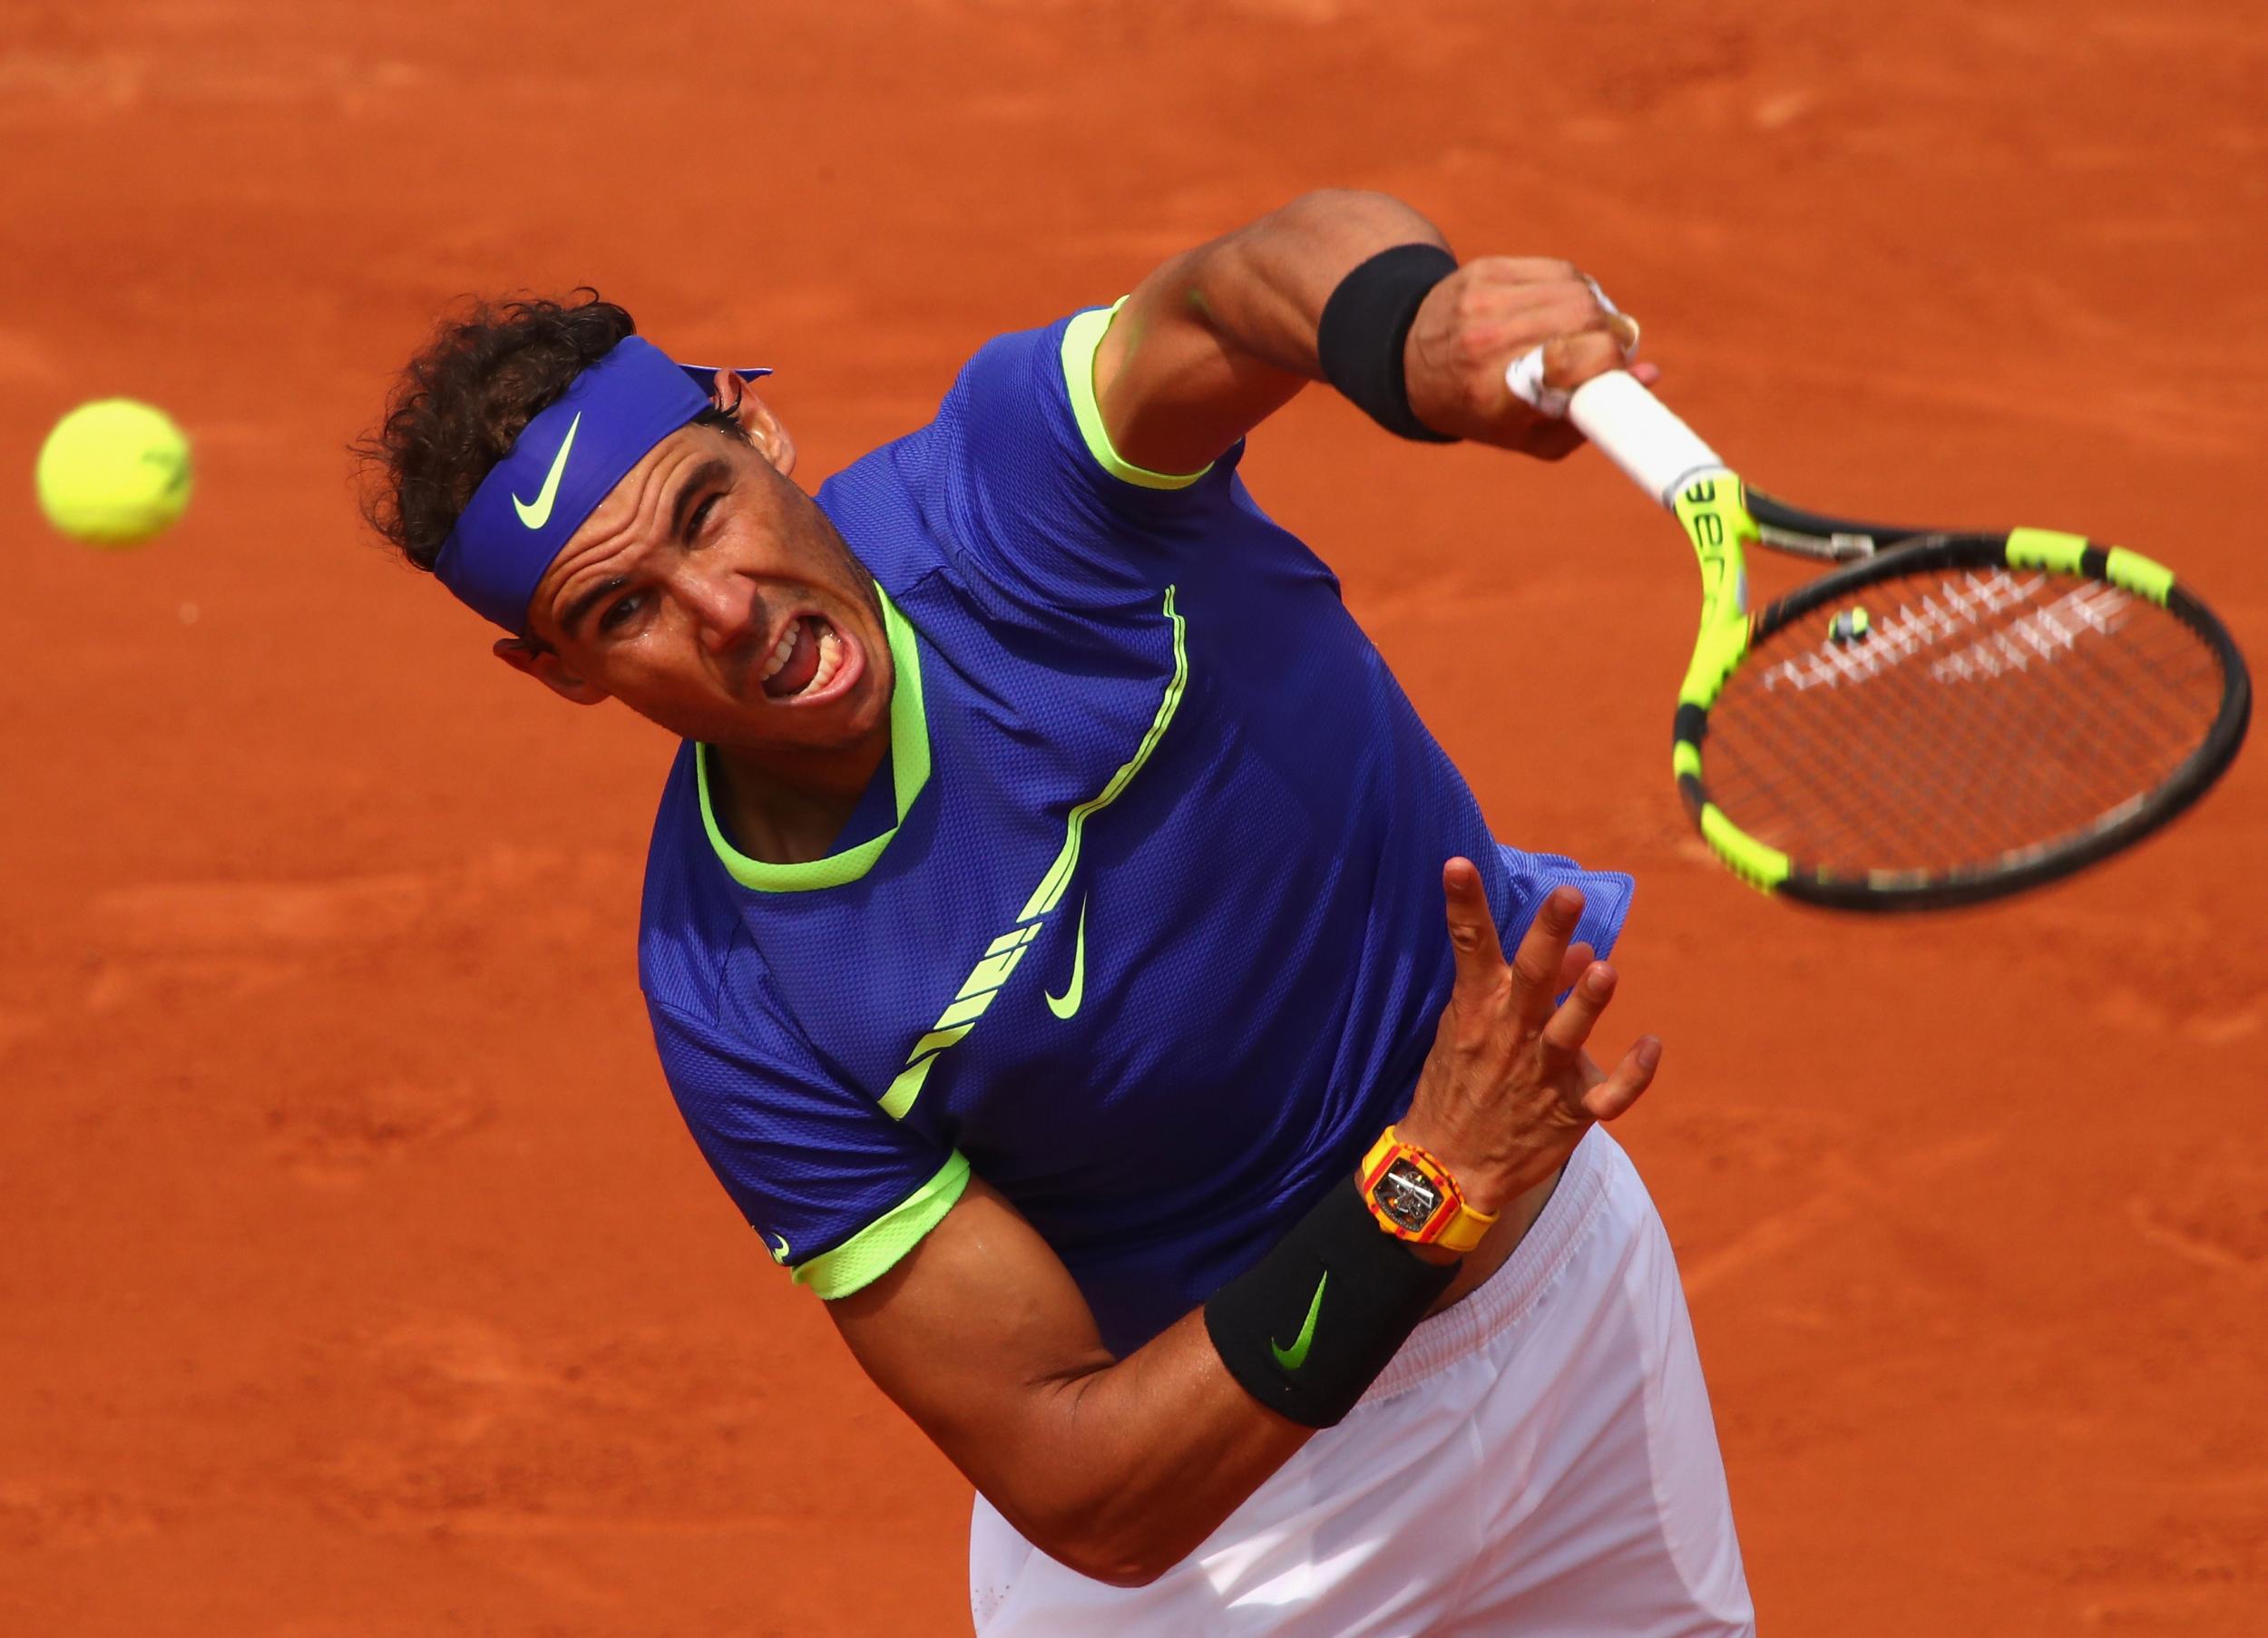 Nadal is looking to win his tenth French Open title